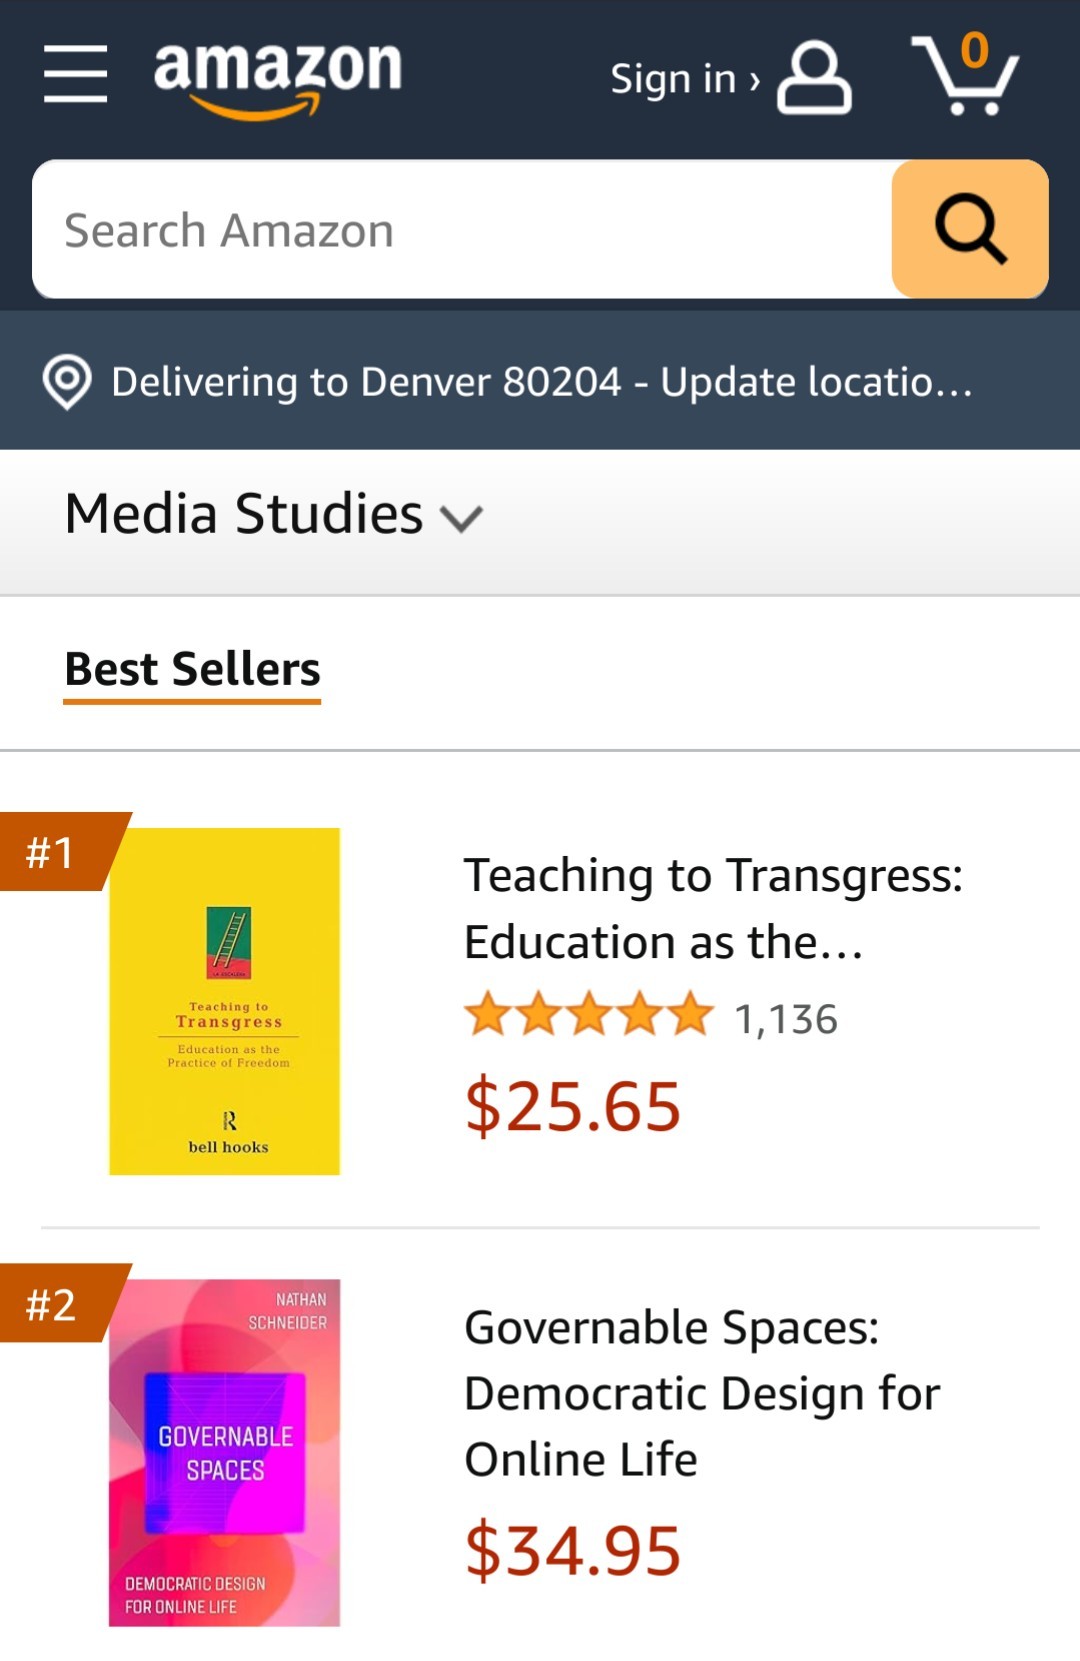 Looks Like New as the #2 book in Media Studies on Amazon